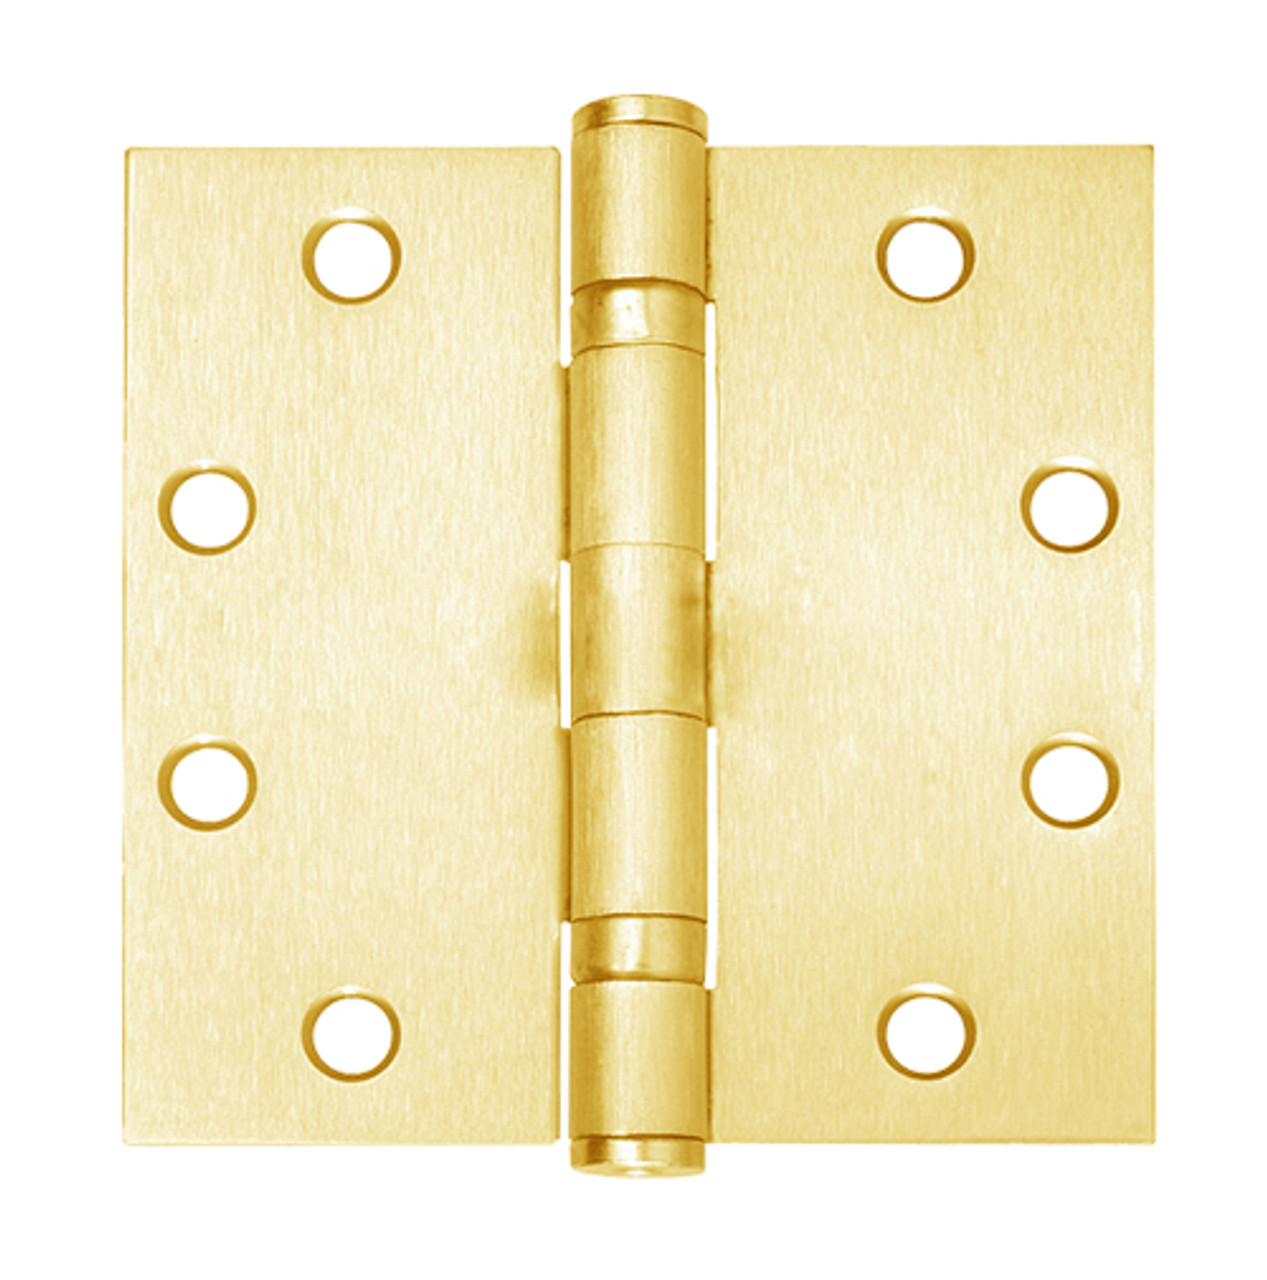 5BB1-4-5x4-605-NRP IVES 5 Knuckle Ball Bearing Full Mortise Hinge in Bright Brass